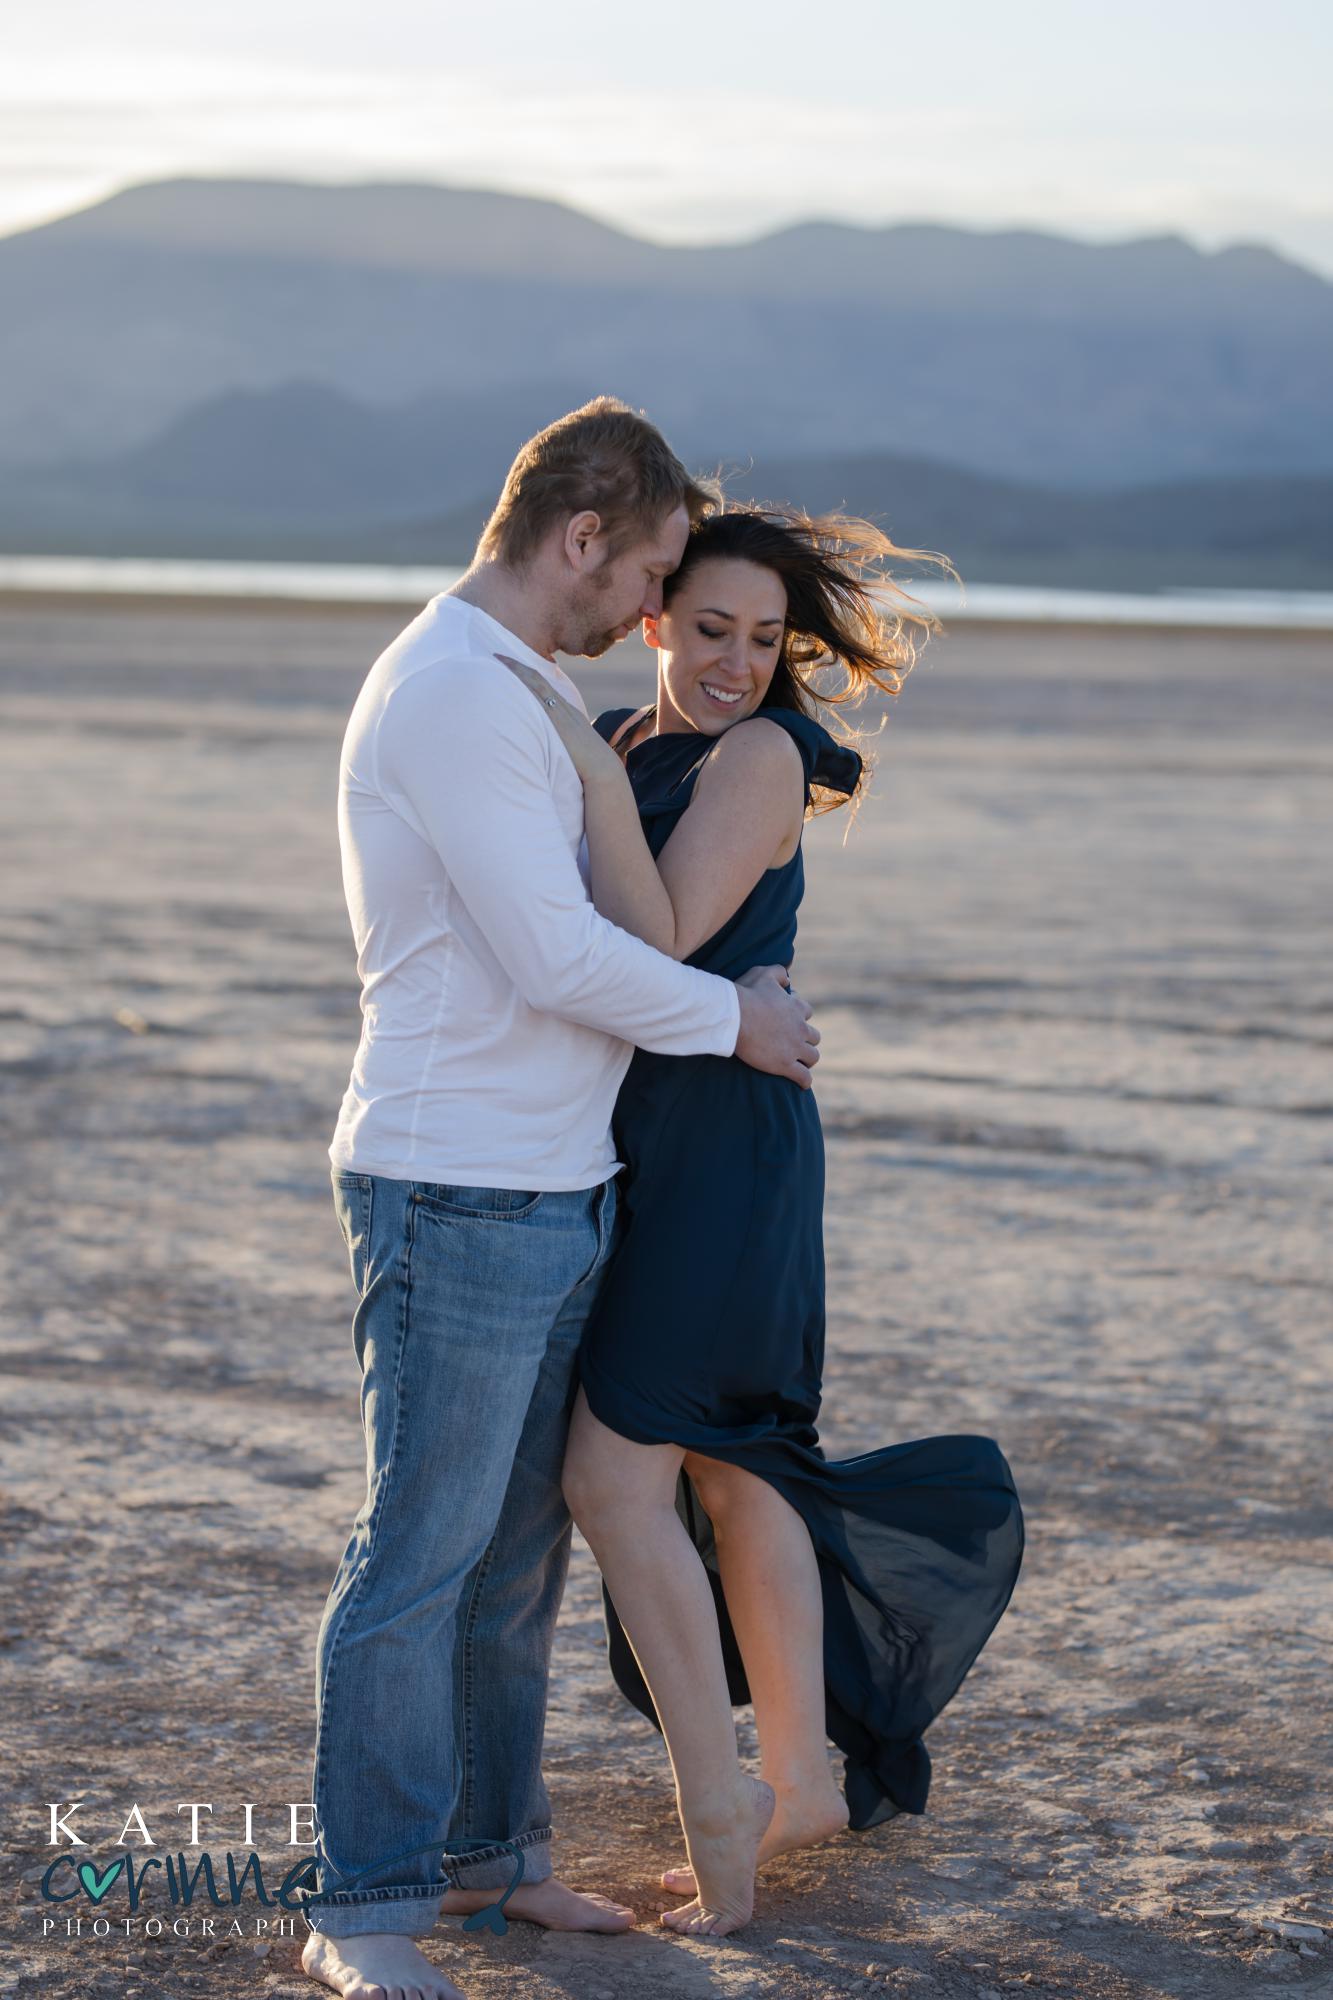 windswept couple hold each other in front of mountain range